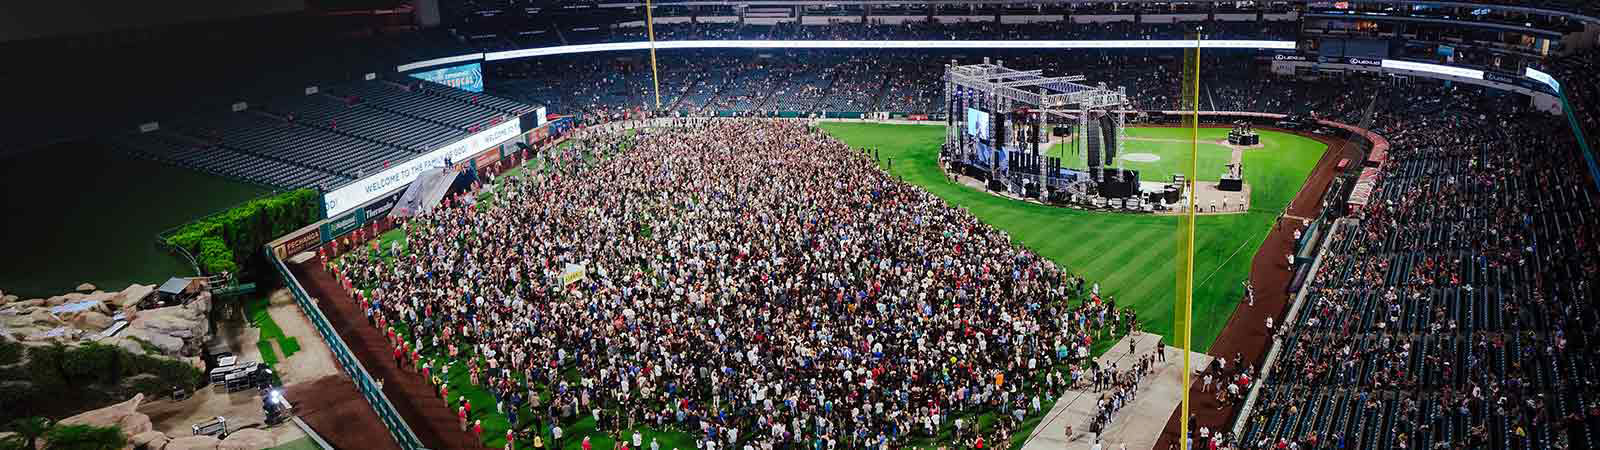 10,000 Turn to Christ at SoCal Harvest